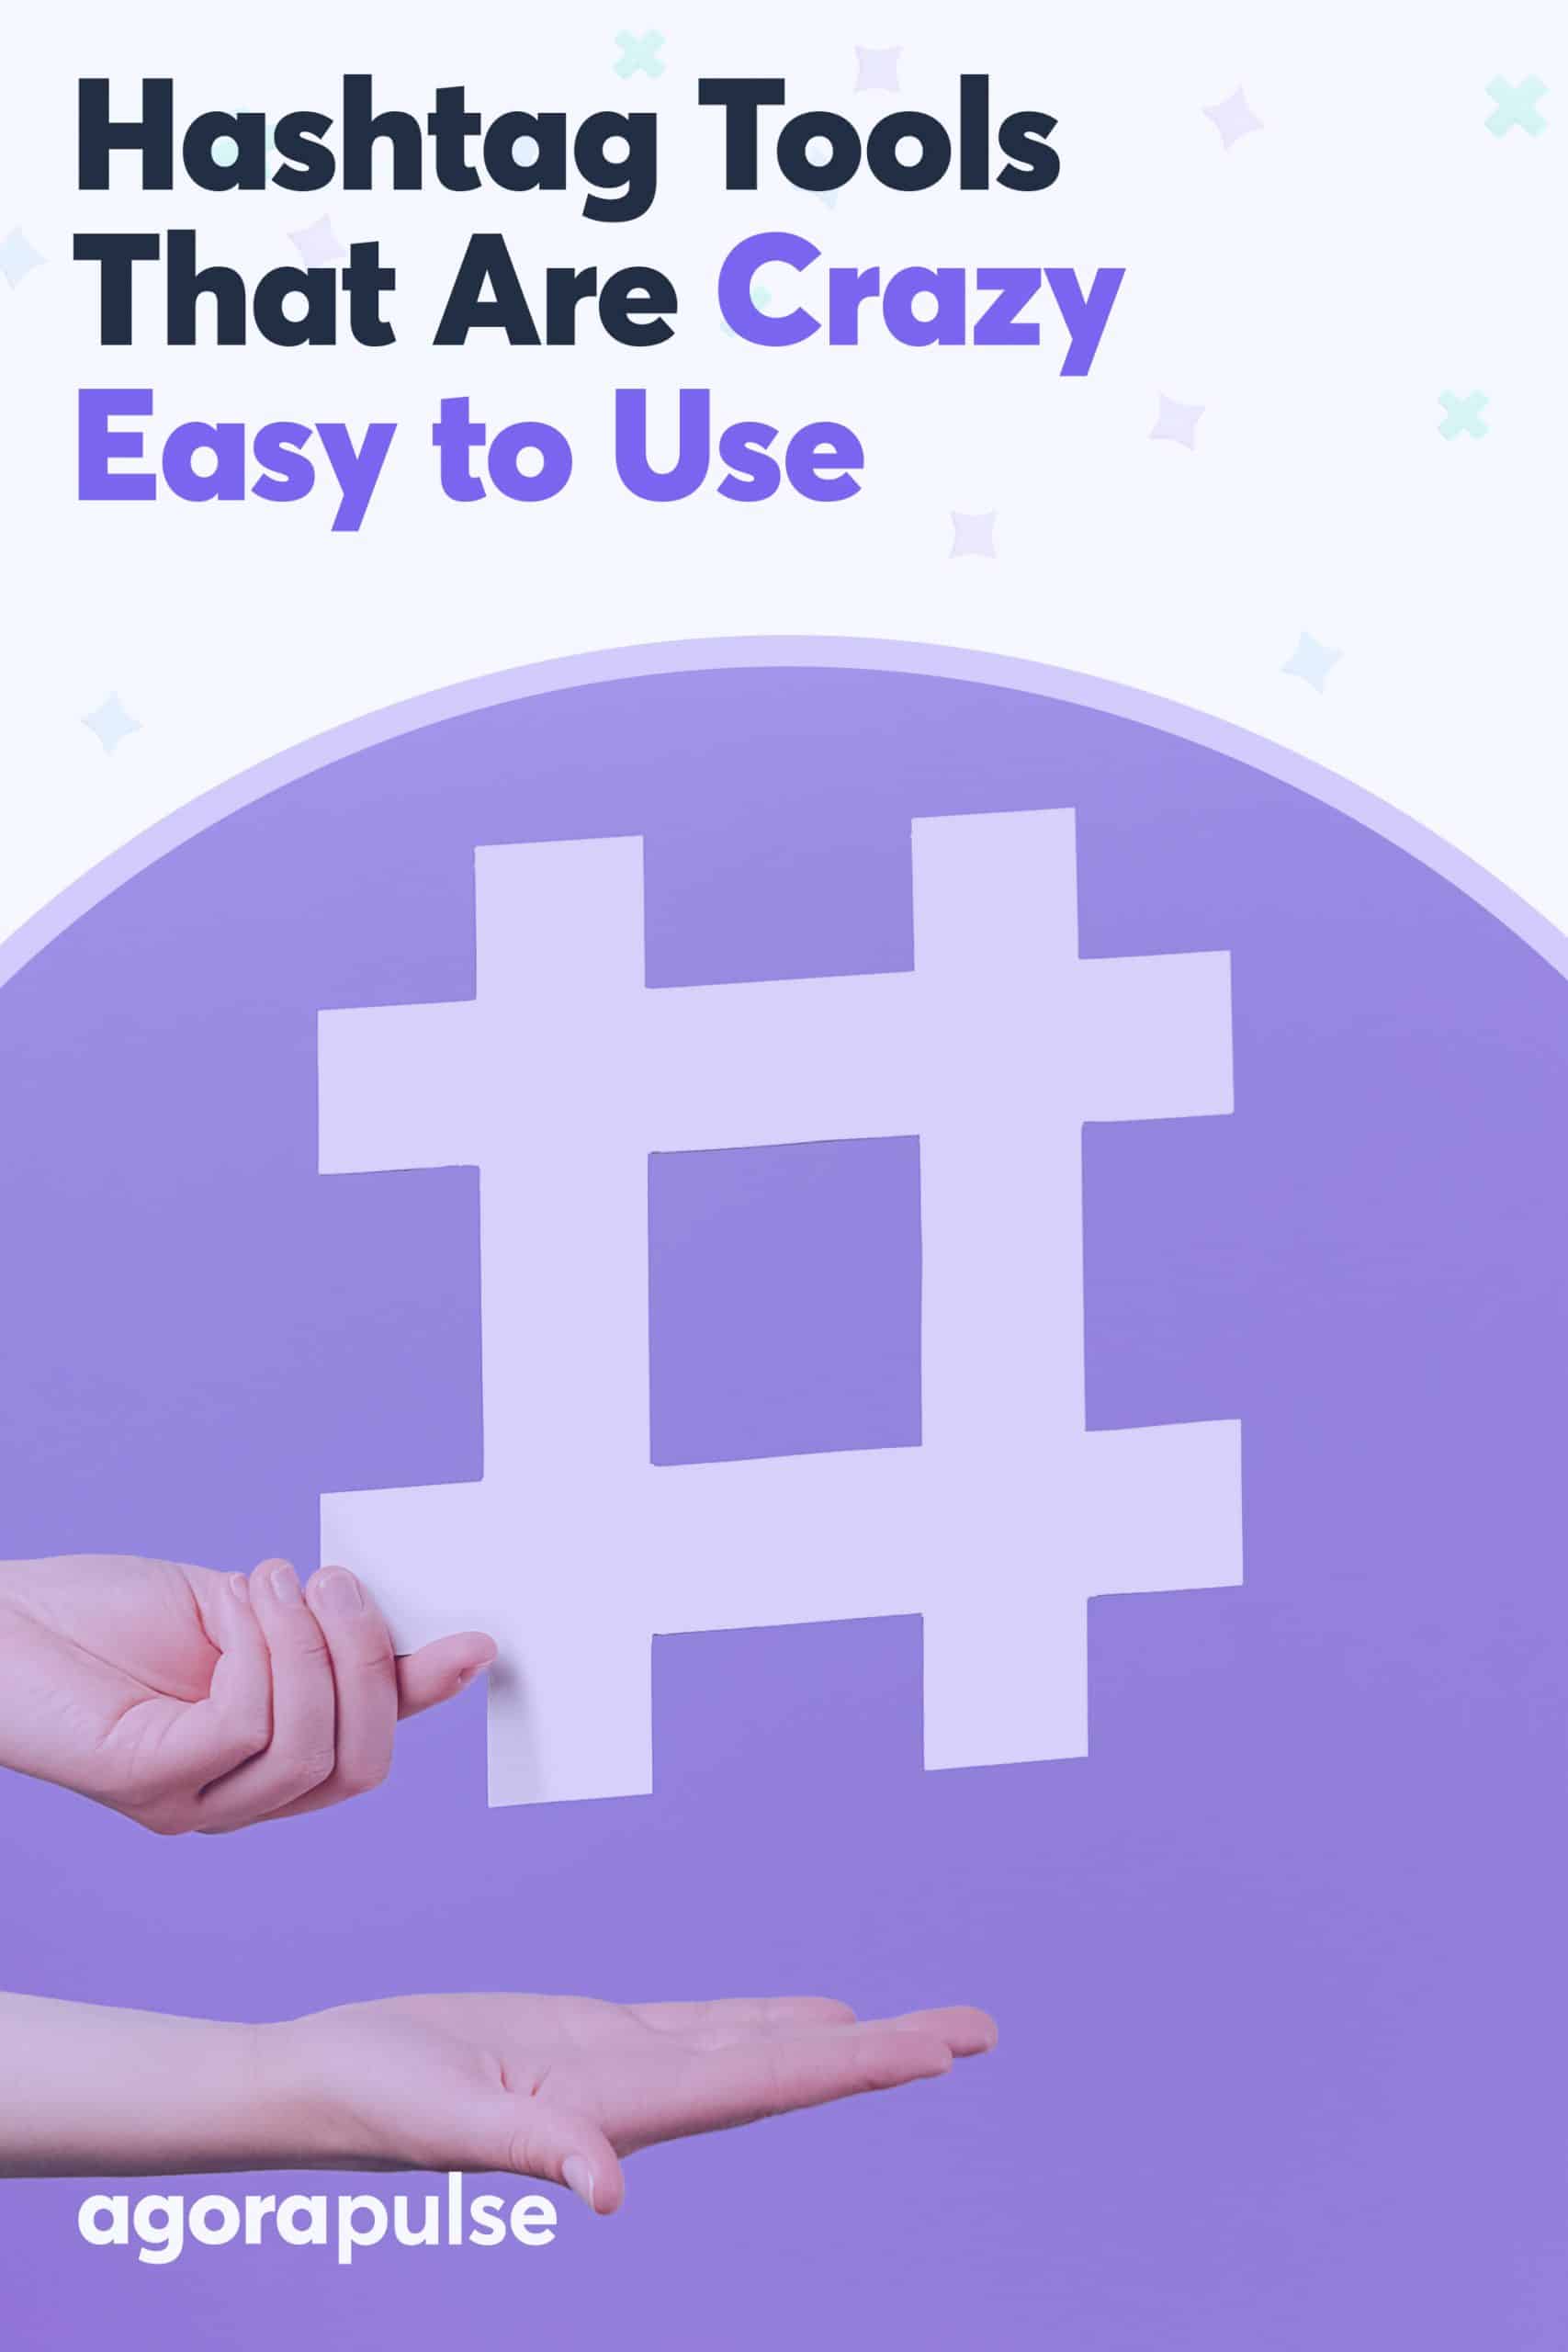 Hashtag Search Tools That Are Crazy Easy to Use